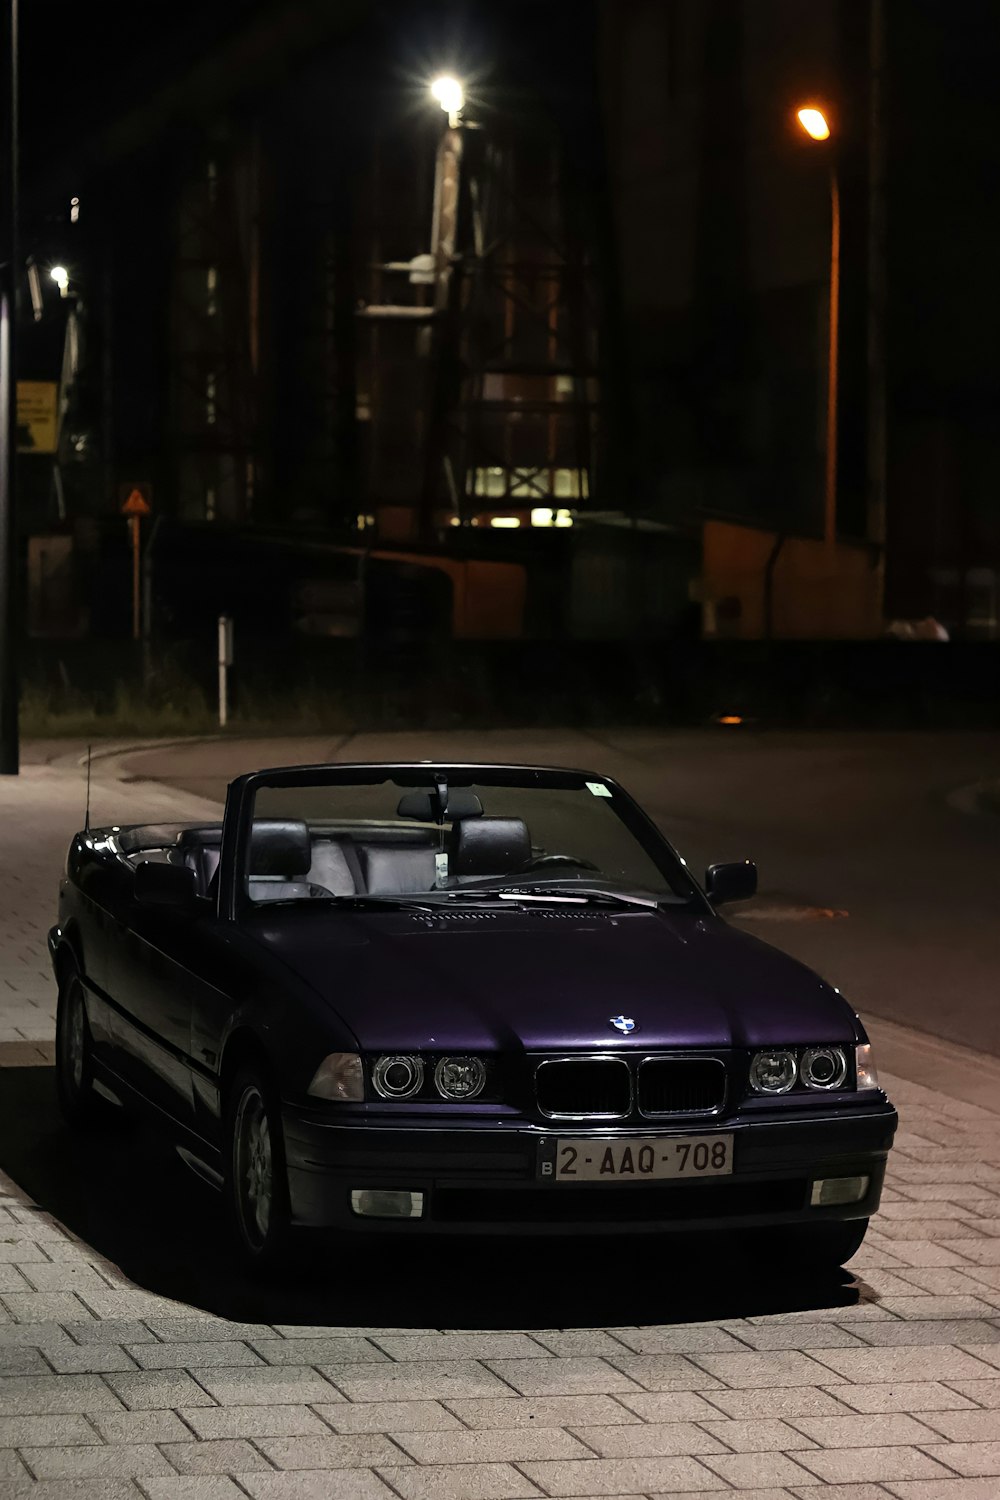 a purple convertible car parked on the side of the road